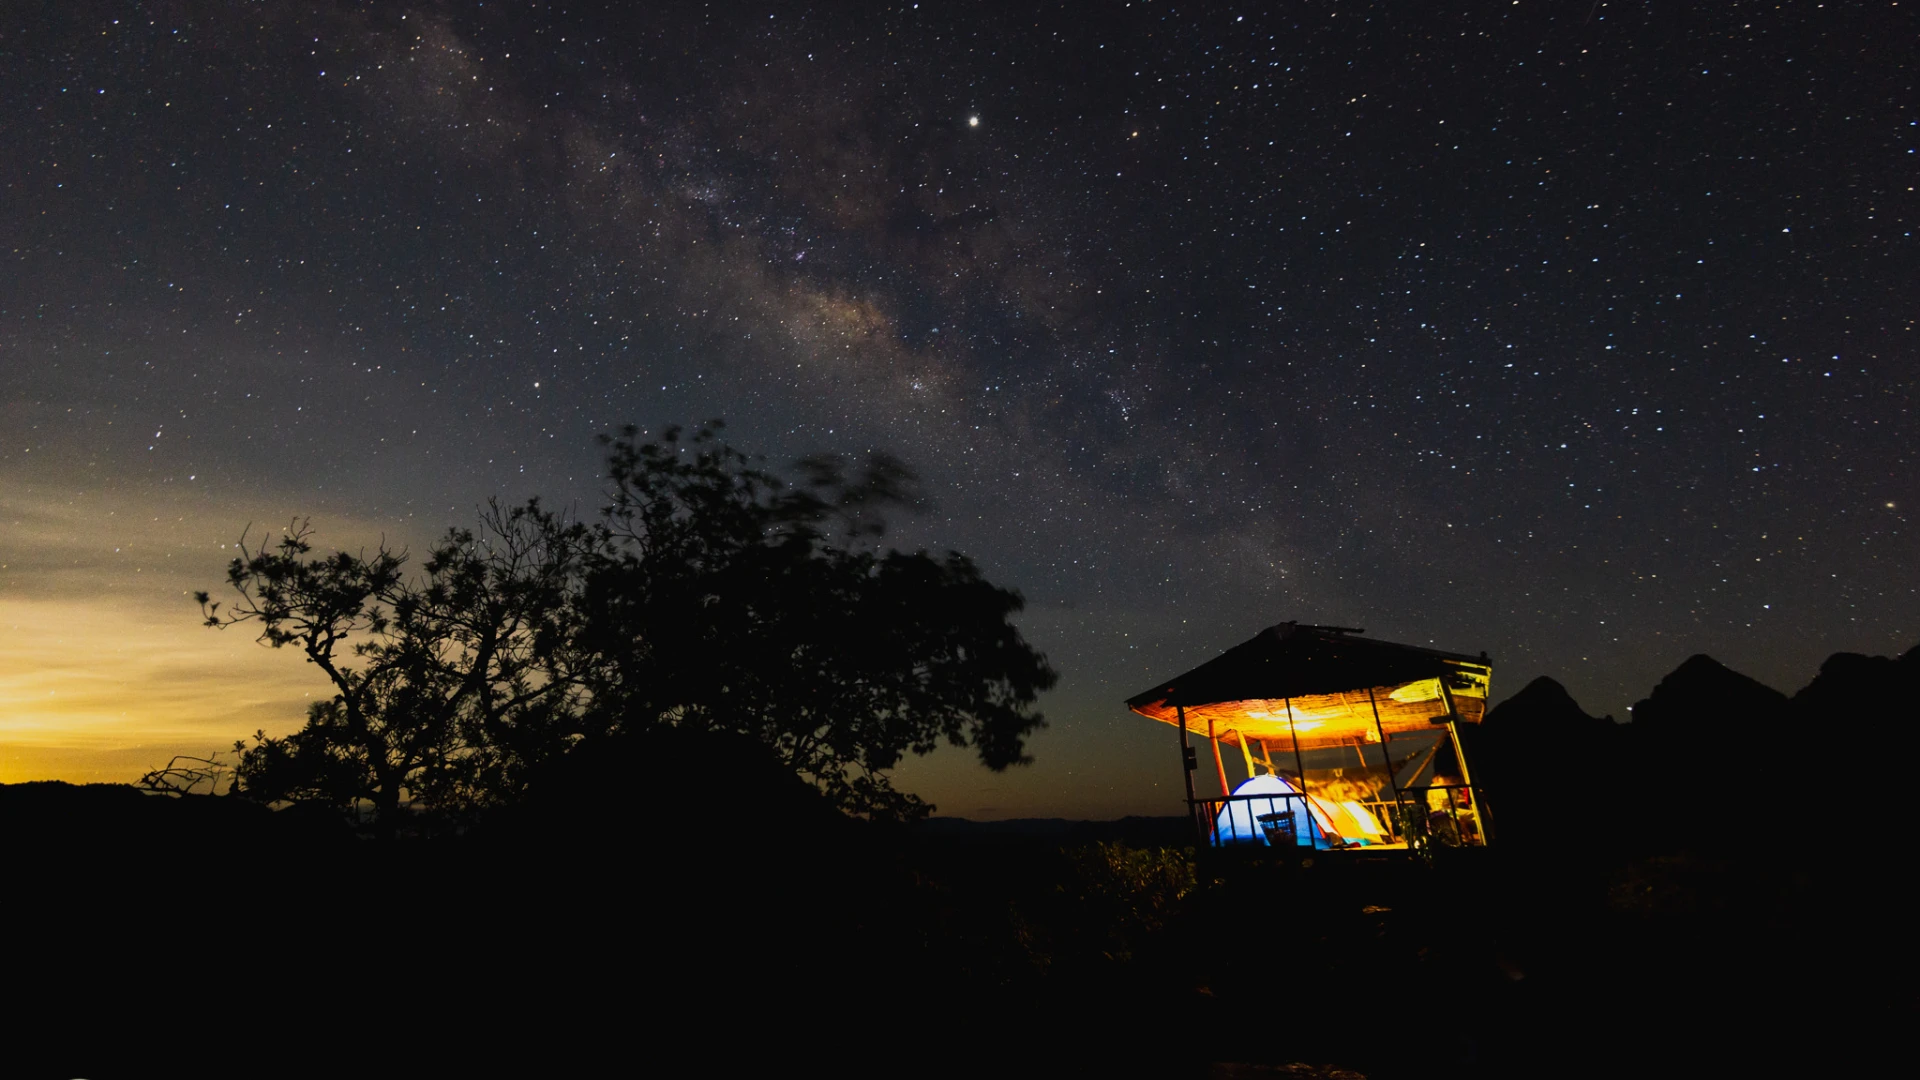 Pha Daeng Viewpoint in Nong Khiaw at night with the milky way.